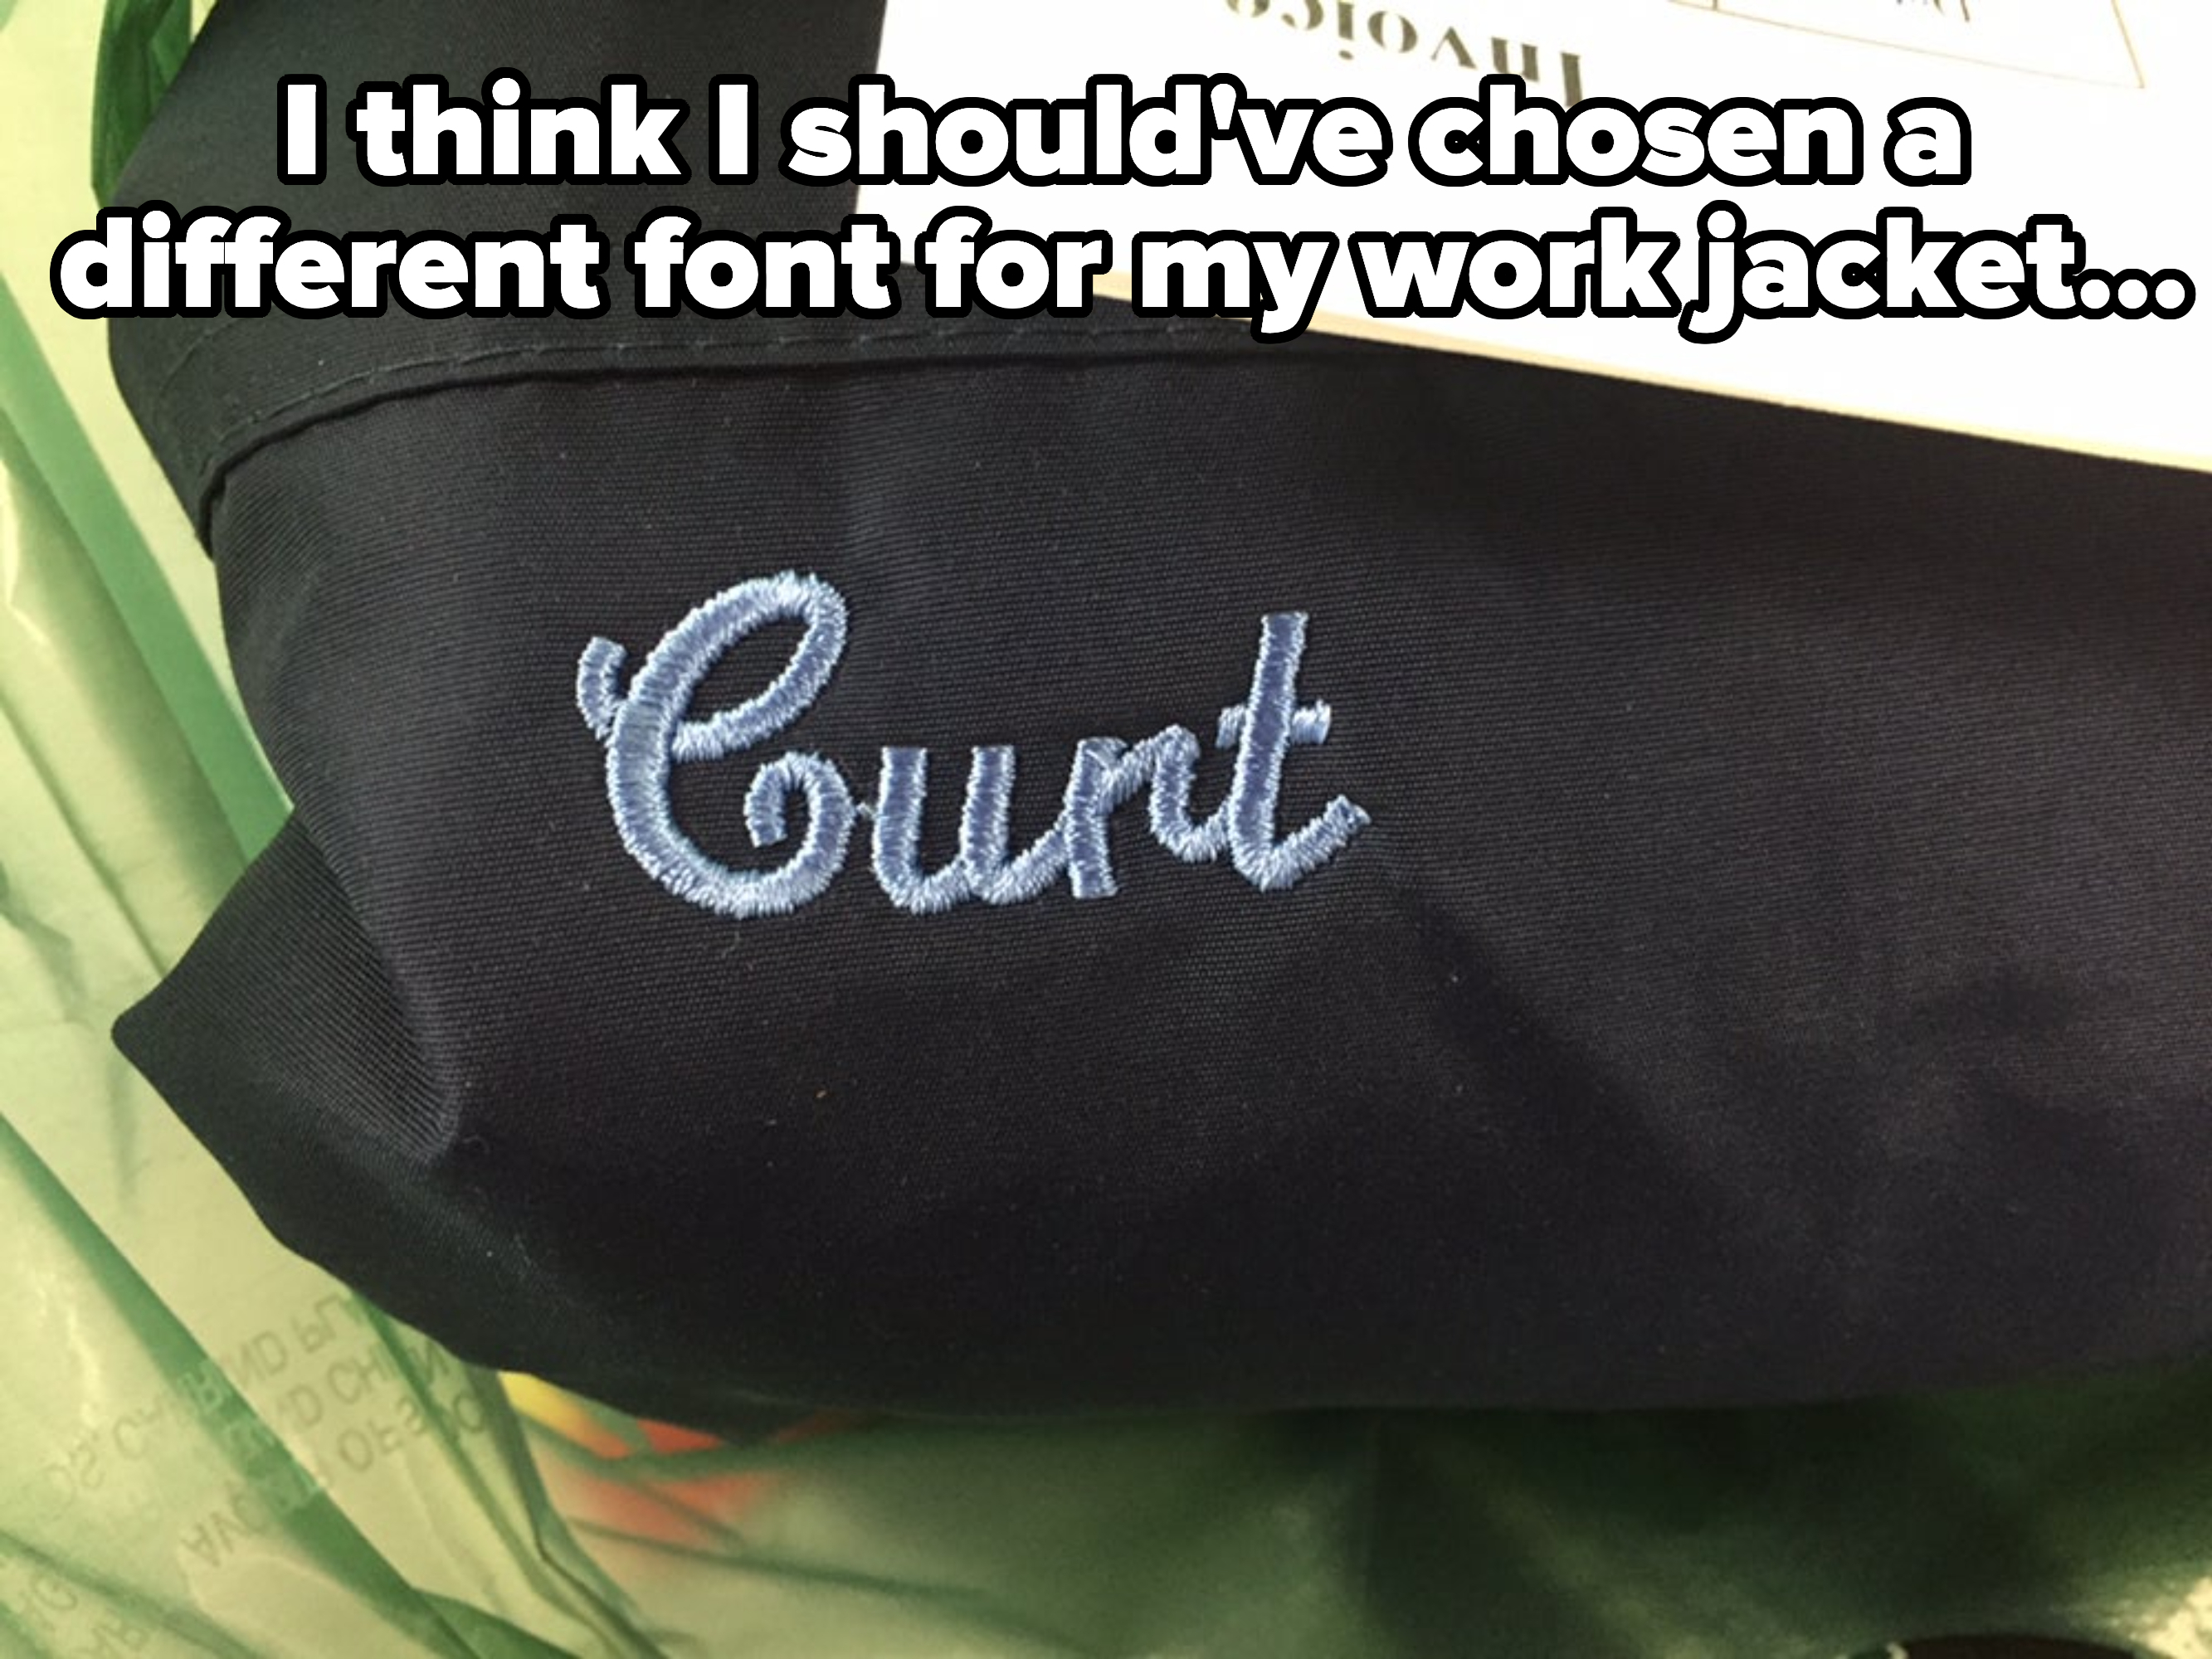 Close-up of a work jacket with a name that&#x27;s supposed to be &quot;Curt&quot; but looks like the c-word, with caption &quot;I think I should&#x27;ve chosen a different font for my work jacket&quot;